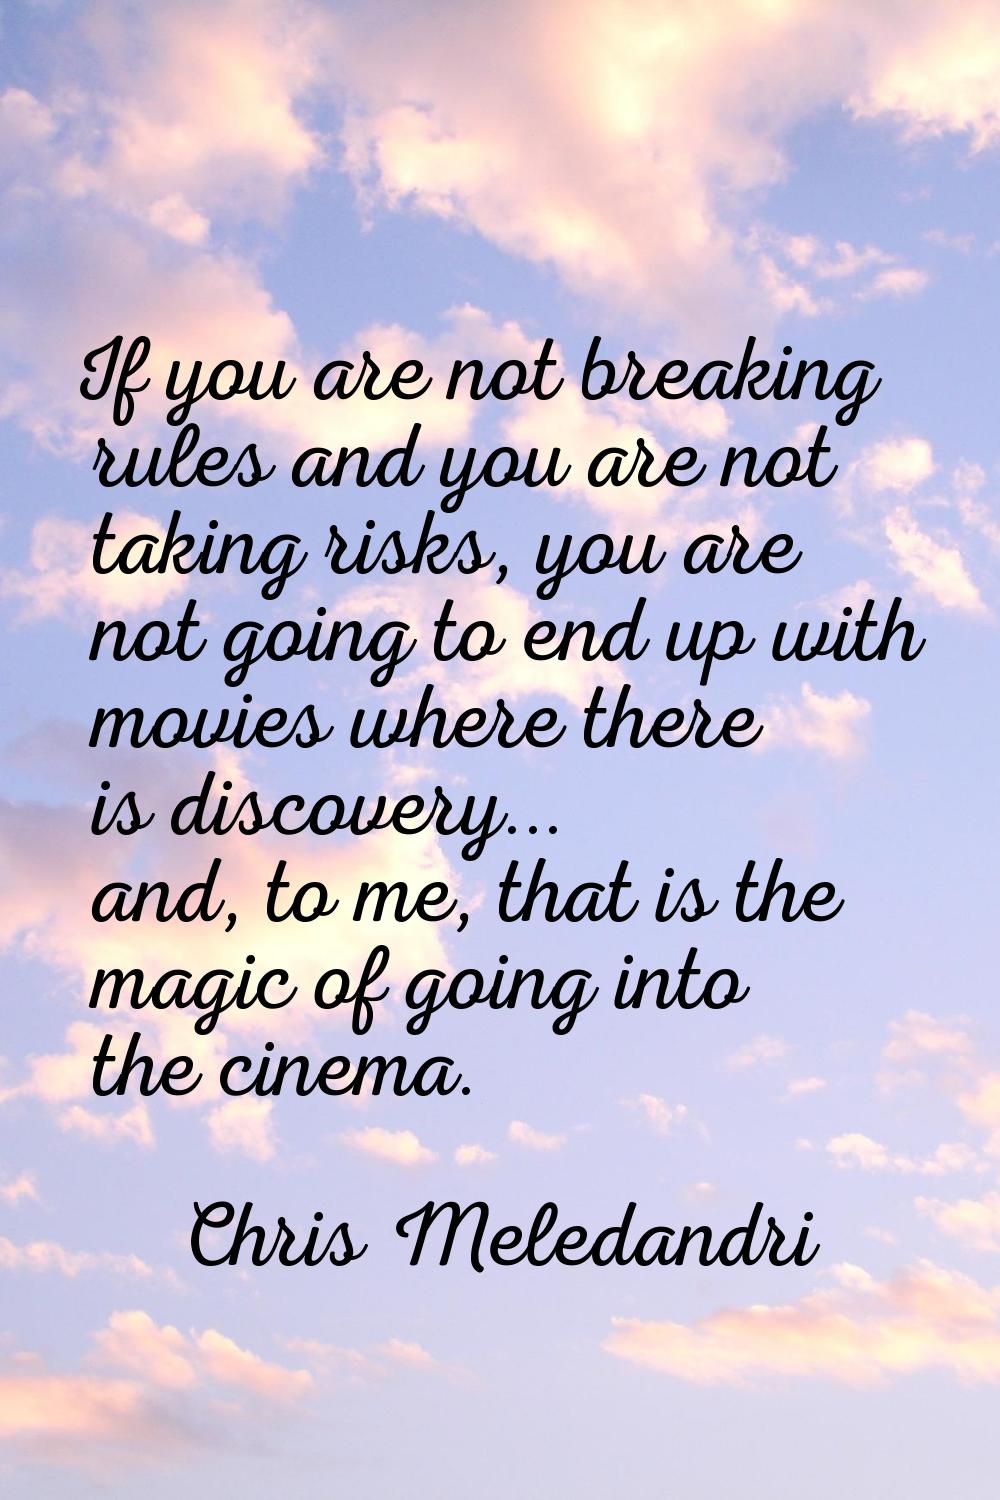 If you are not breaking rules and you are not taking risks, you are not going to end up with movies